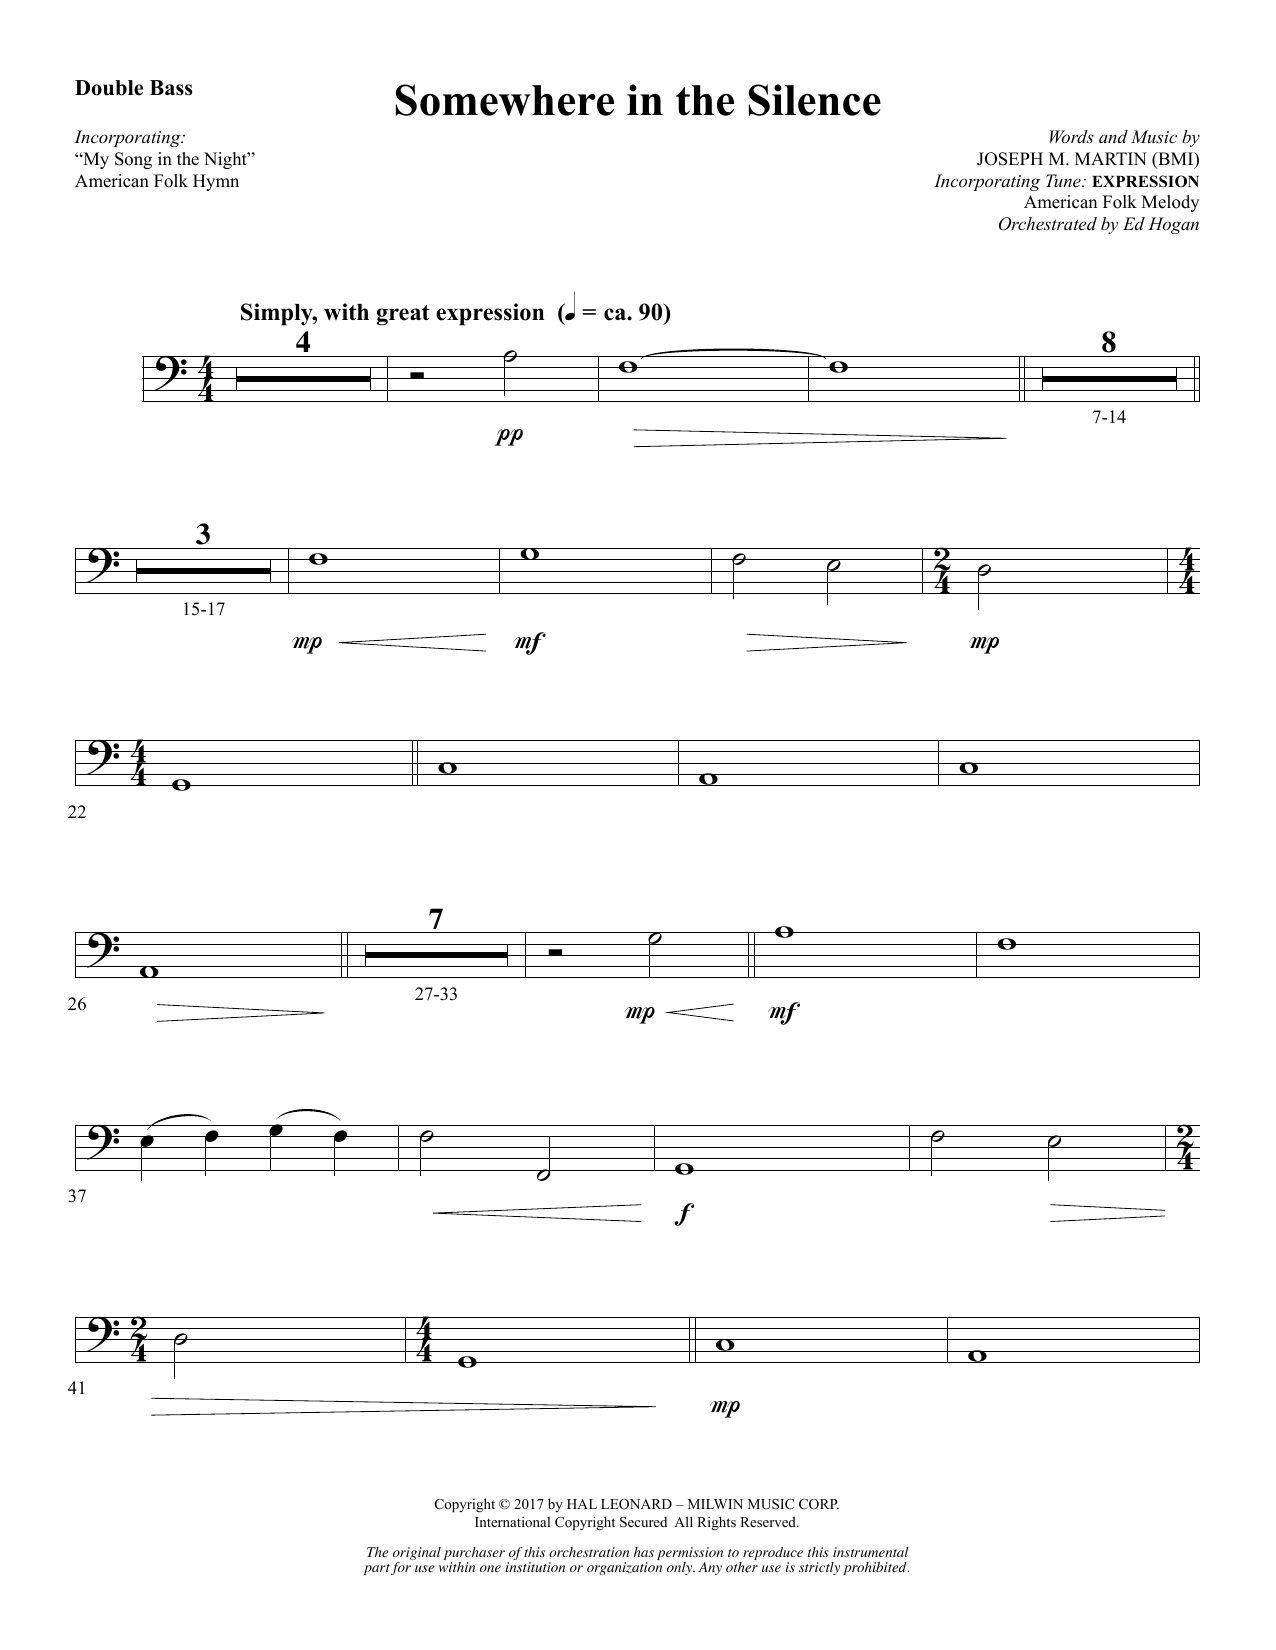 Download Joseph M. Martin Somewhere in the Silence - Double Bass Sheet Music